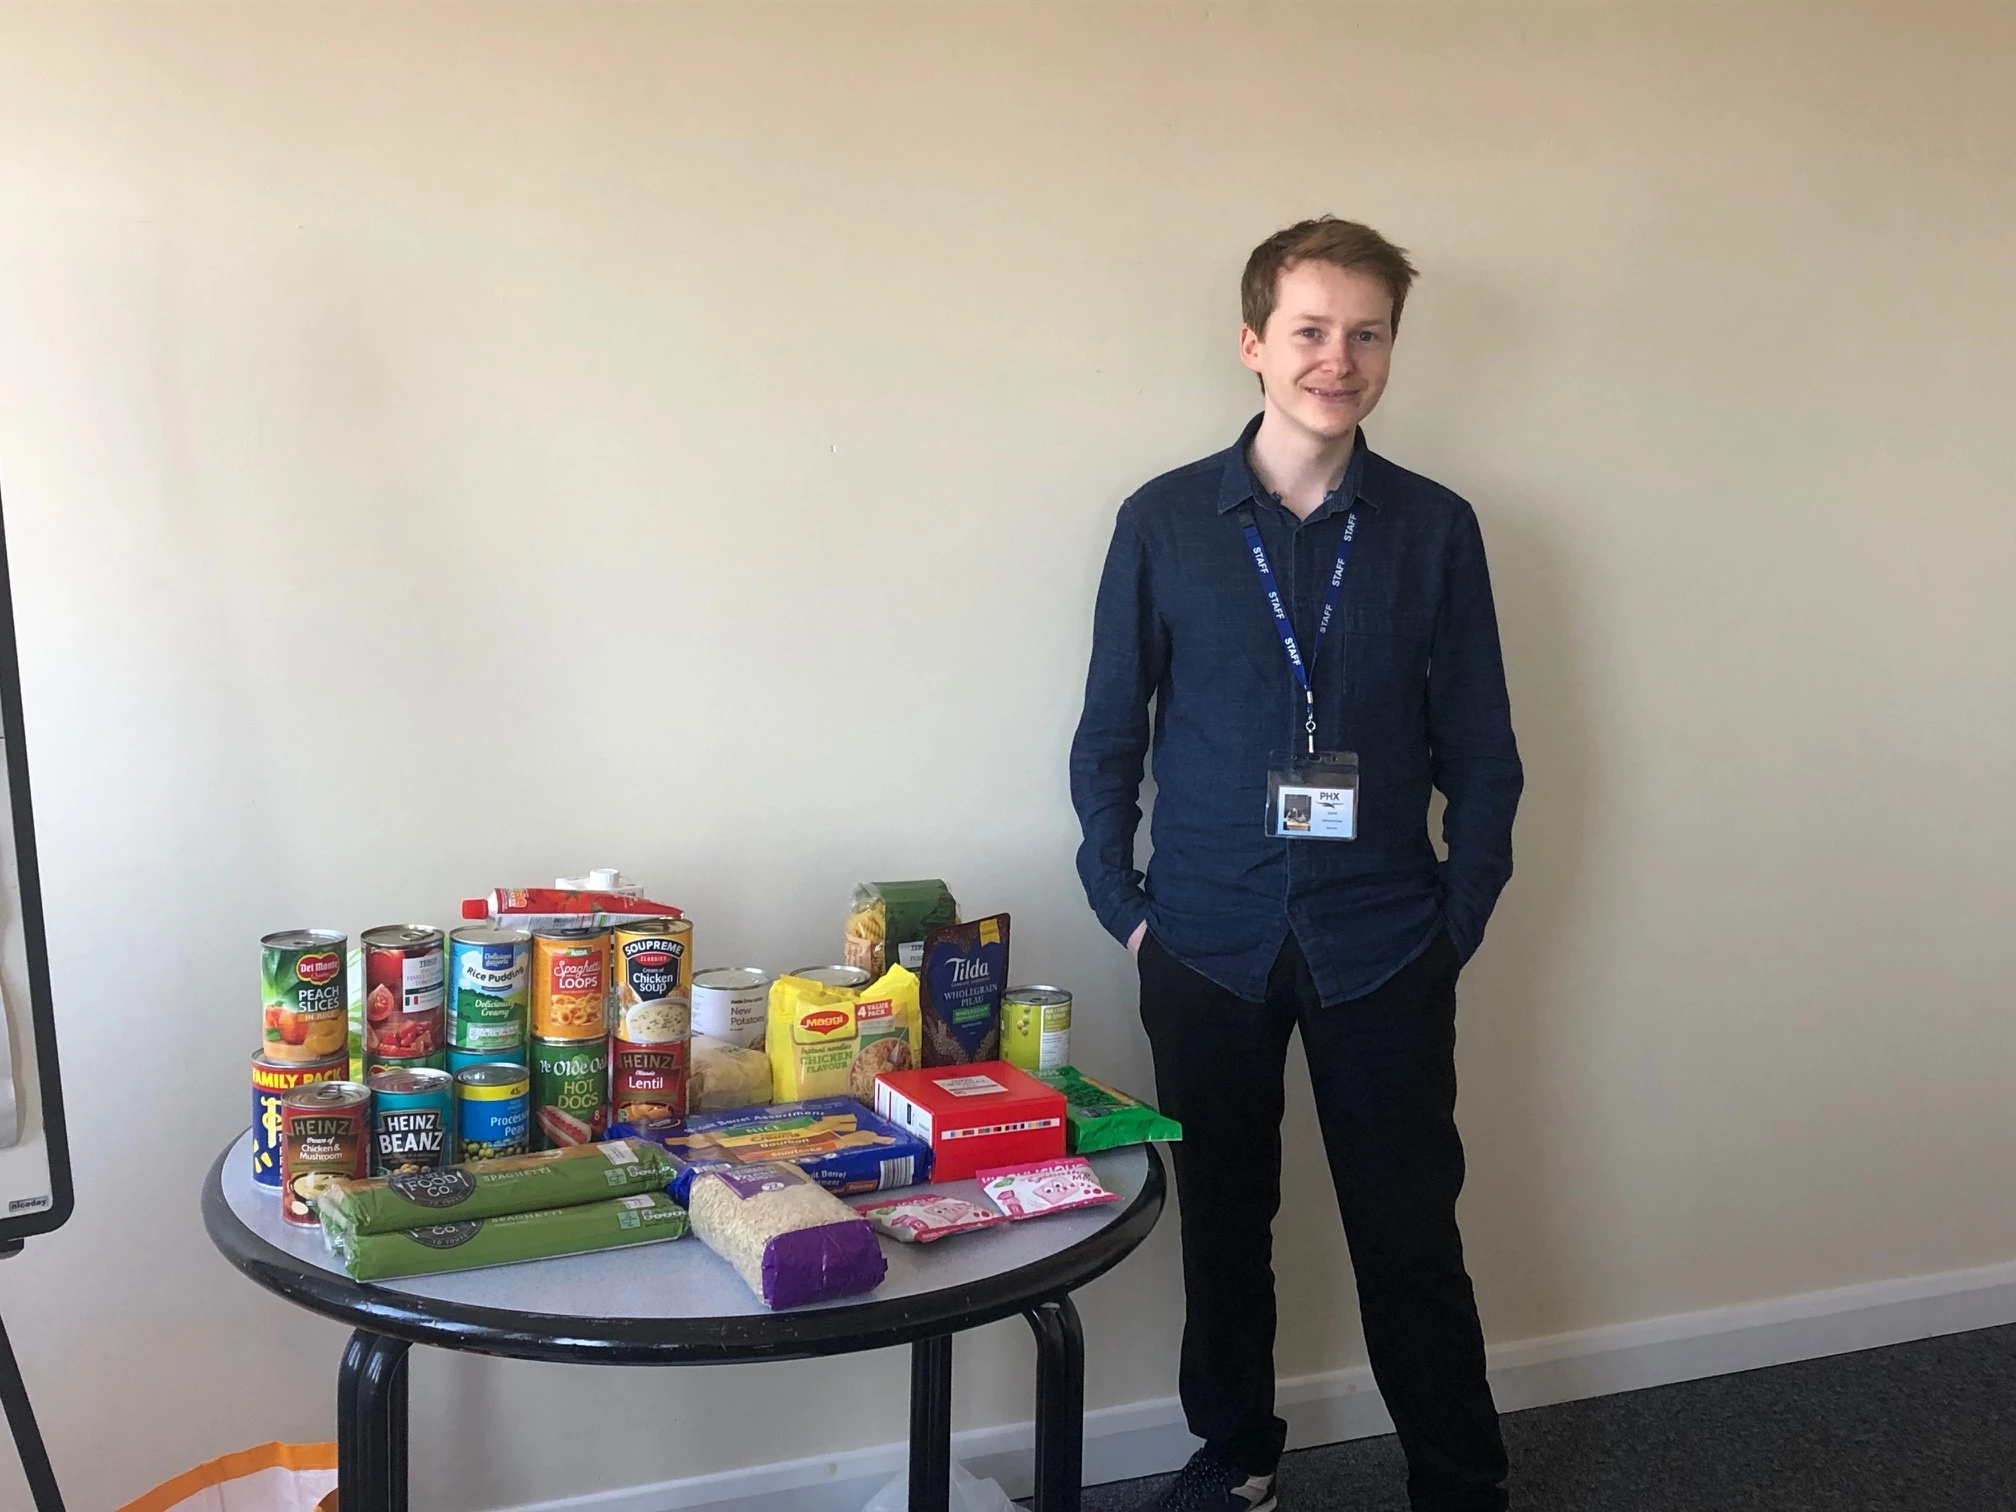 David Hurley with a collection of items for the foodbank